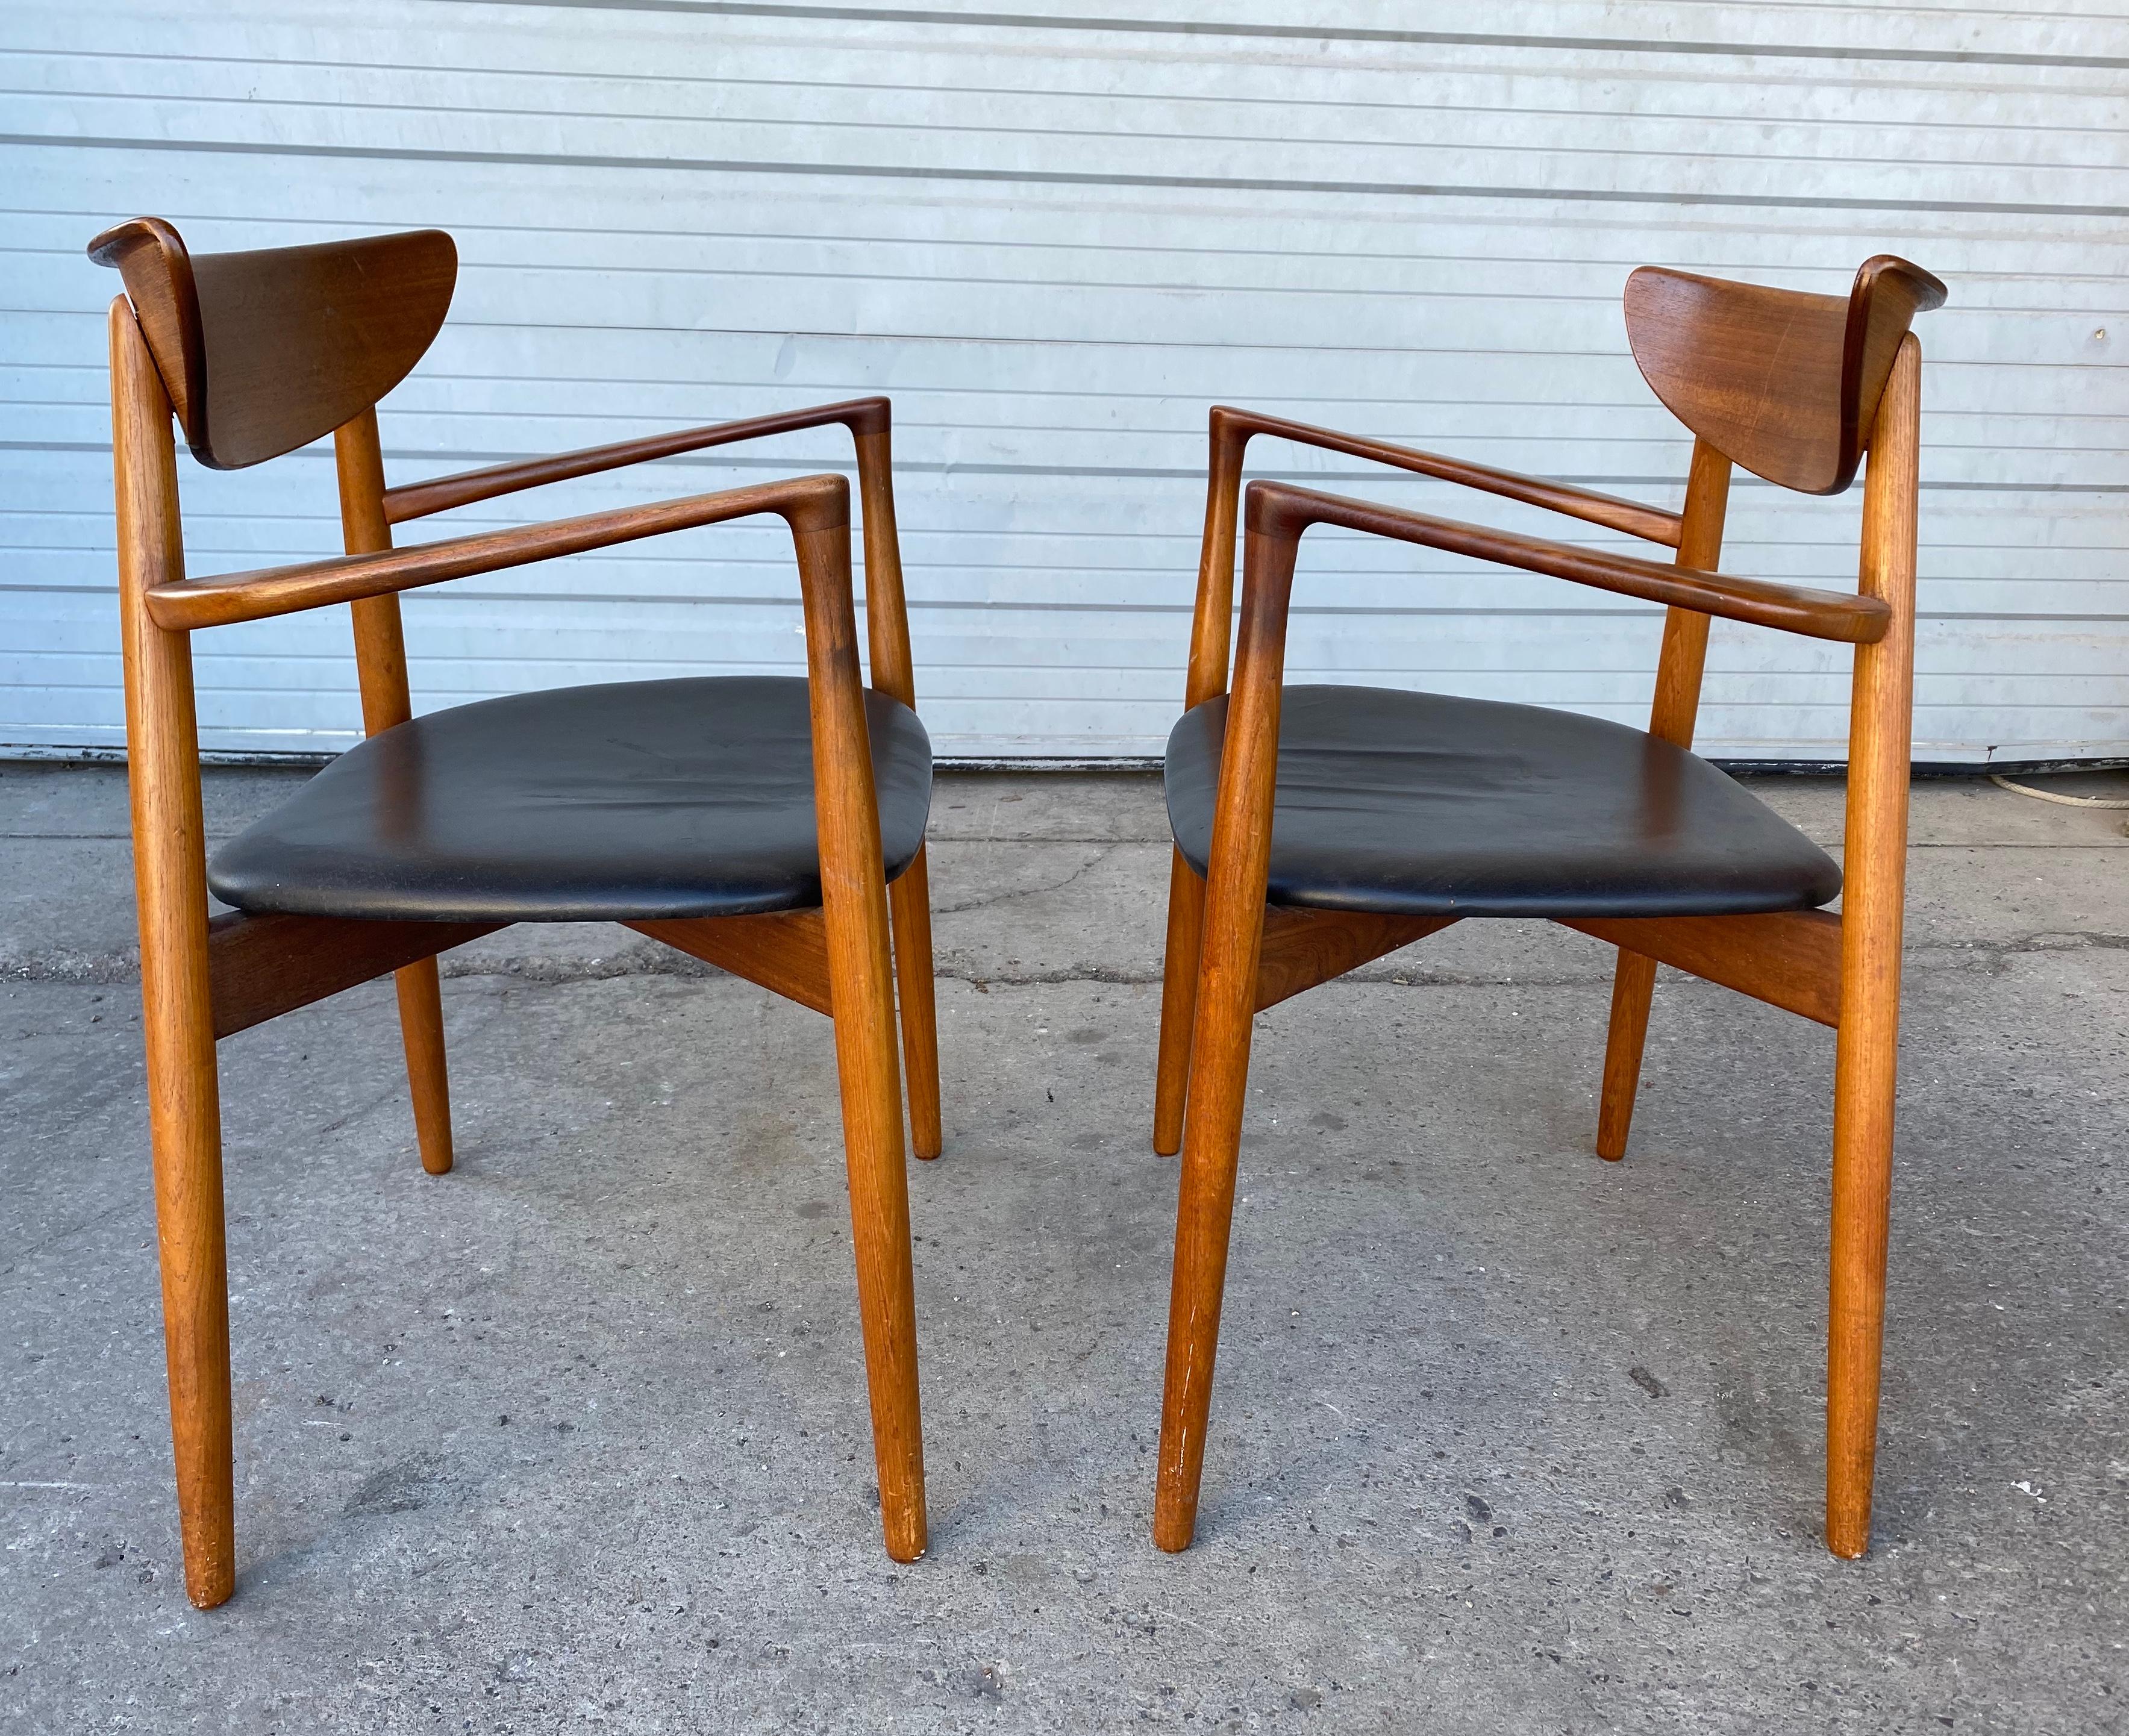 Scandinavian Modern Matched Pair of Armchairs by Harry Østergaard, Denmark, Early 1960s For Sale